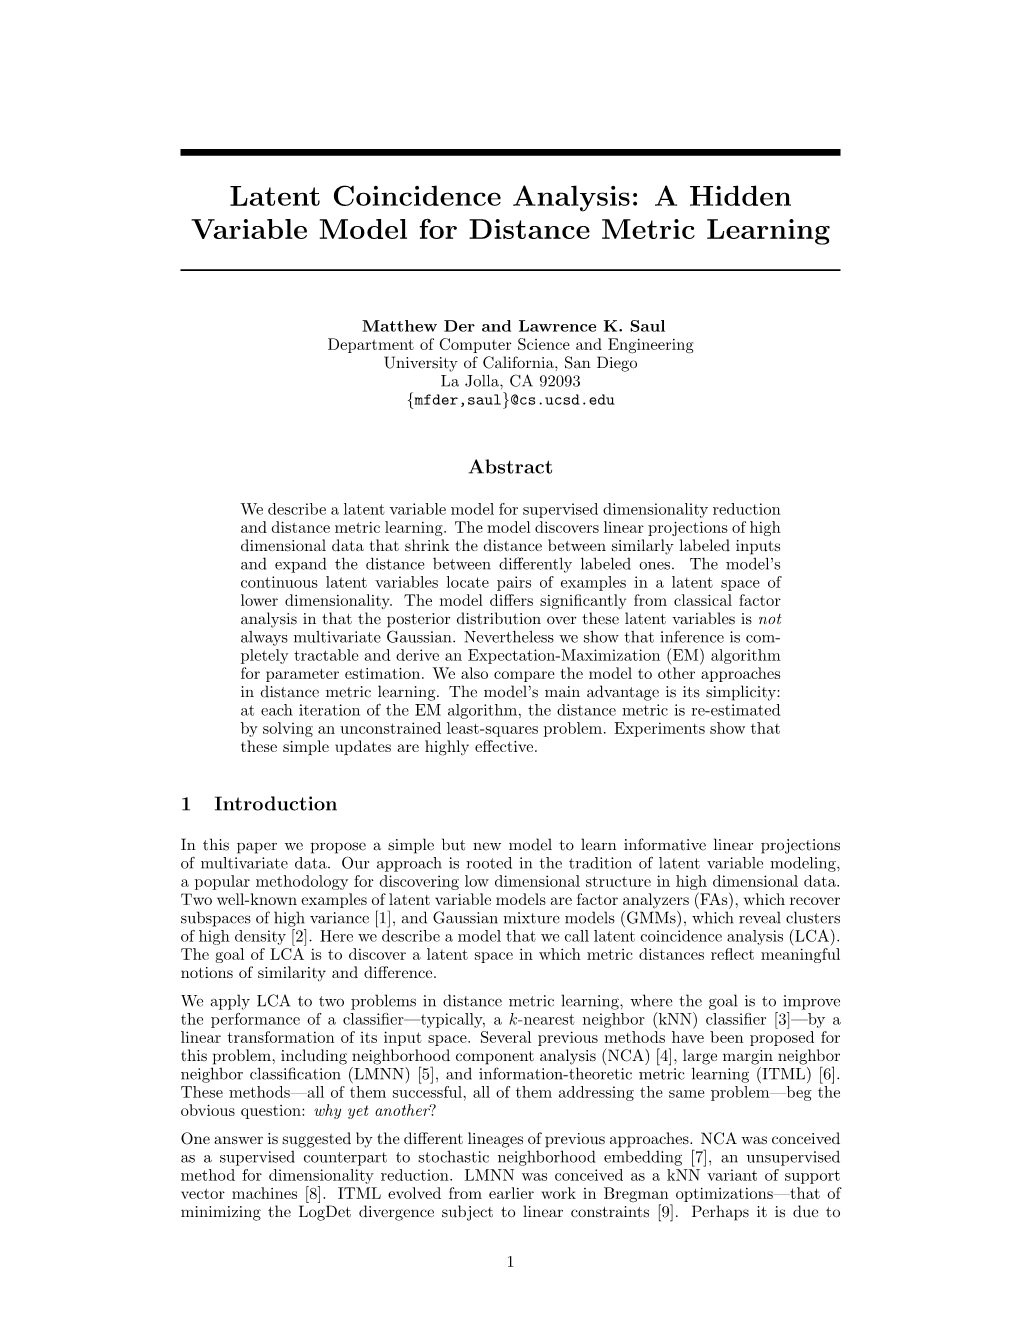 Latent Coincidence Analysis: a Hidden Variable Model for Distance Metric Learning